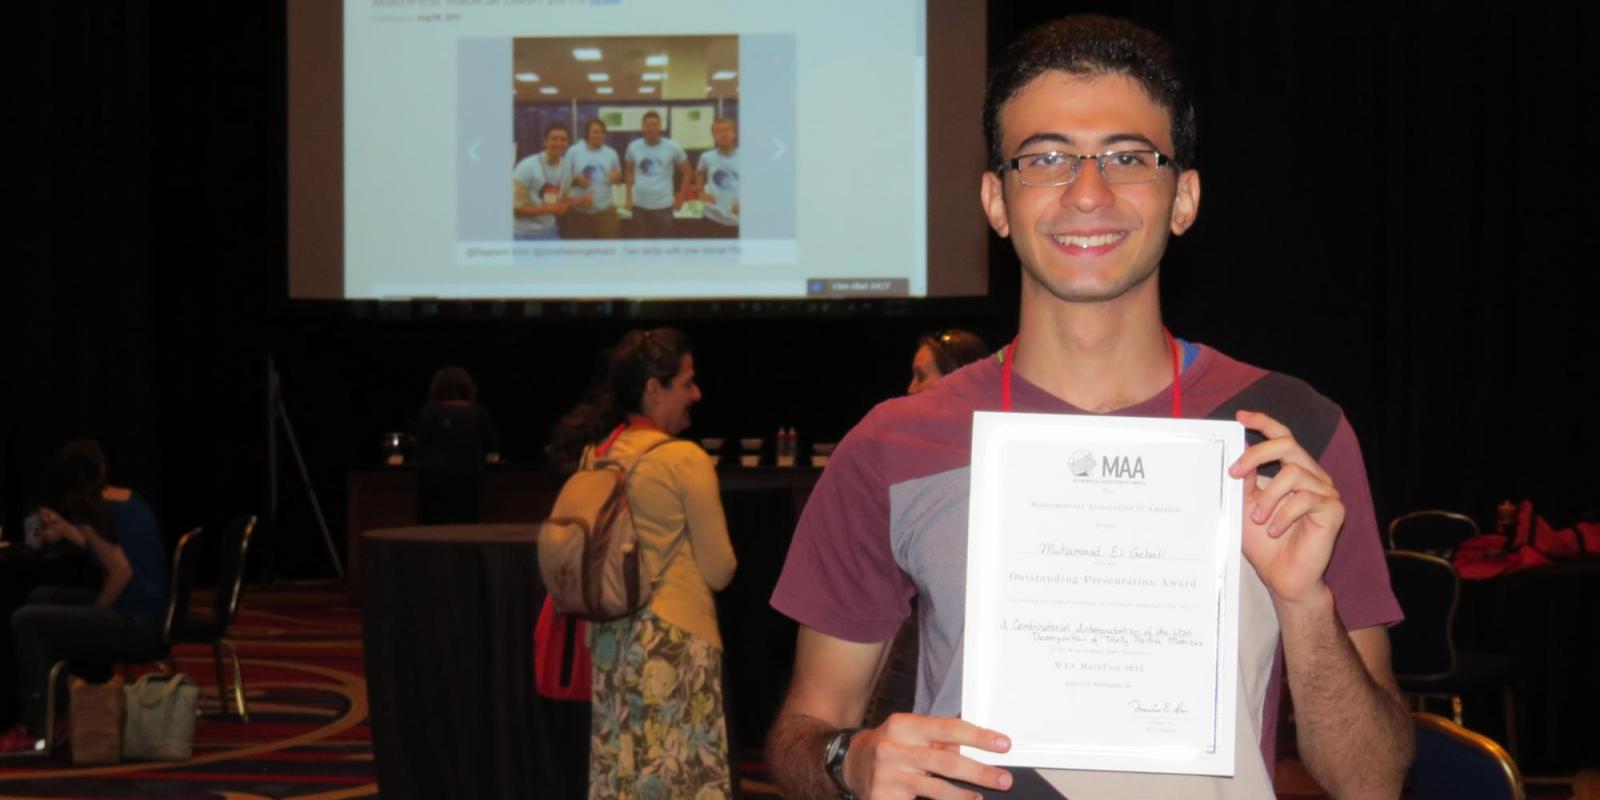 Muhammad El Gebali won the "Outstanding Presentation Award" for his research paper on matrices at this year's MAA Mathfest 